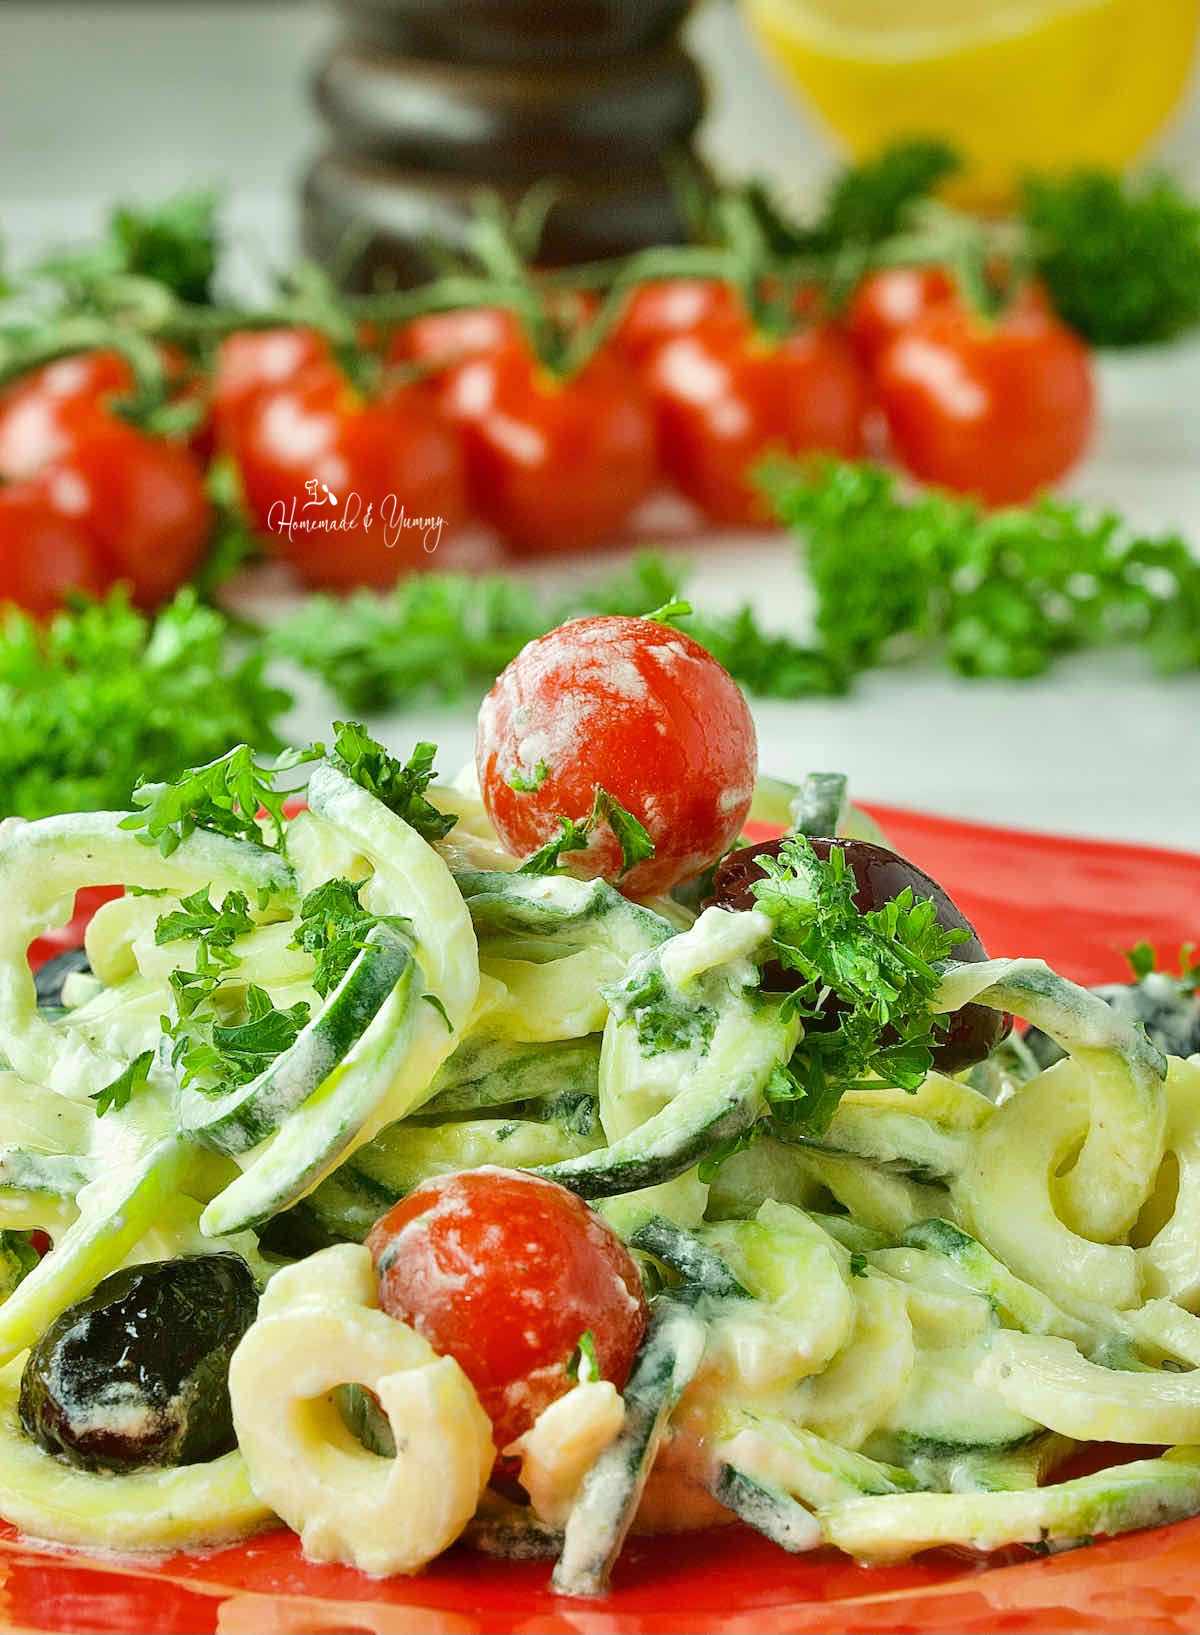 Zucchini noodle salad with olives, tomatoes and creamy goat cheese.